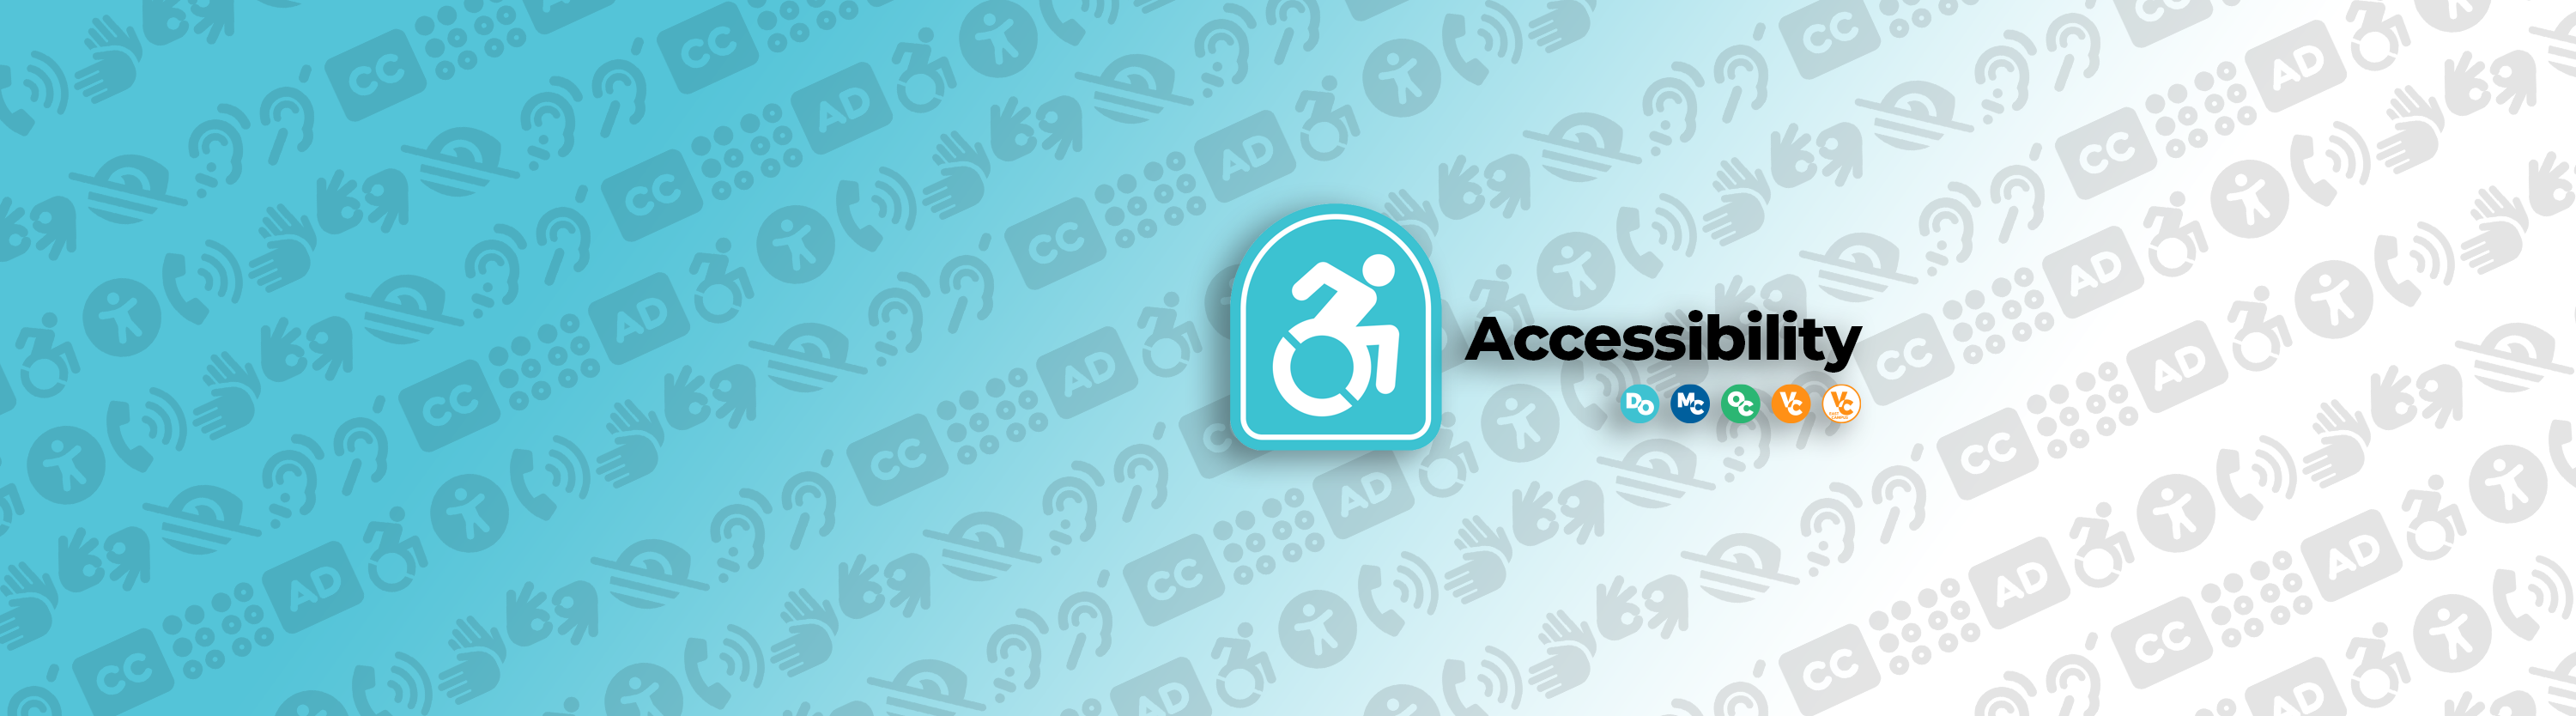 Various Accessibility Icons shown in a background pattern, ϲ Accessibility Icon and college circle icons with text that reads, Accessibility